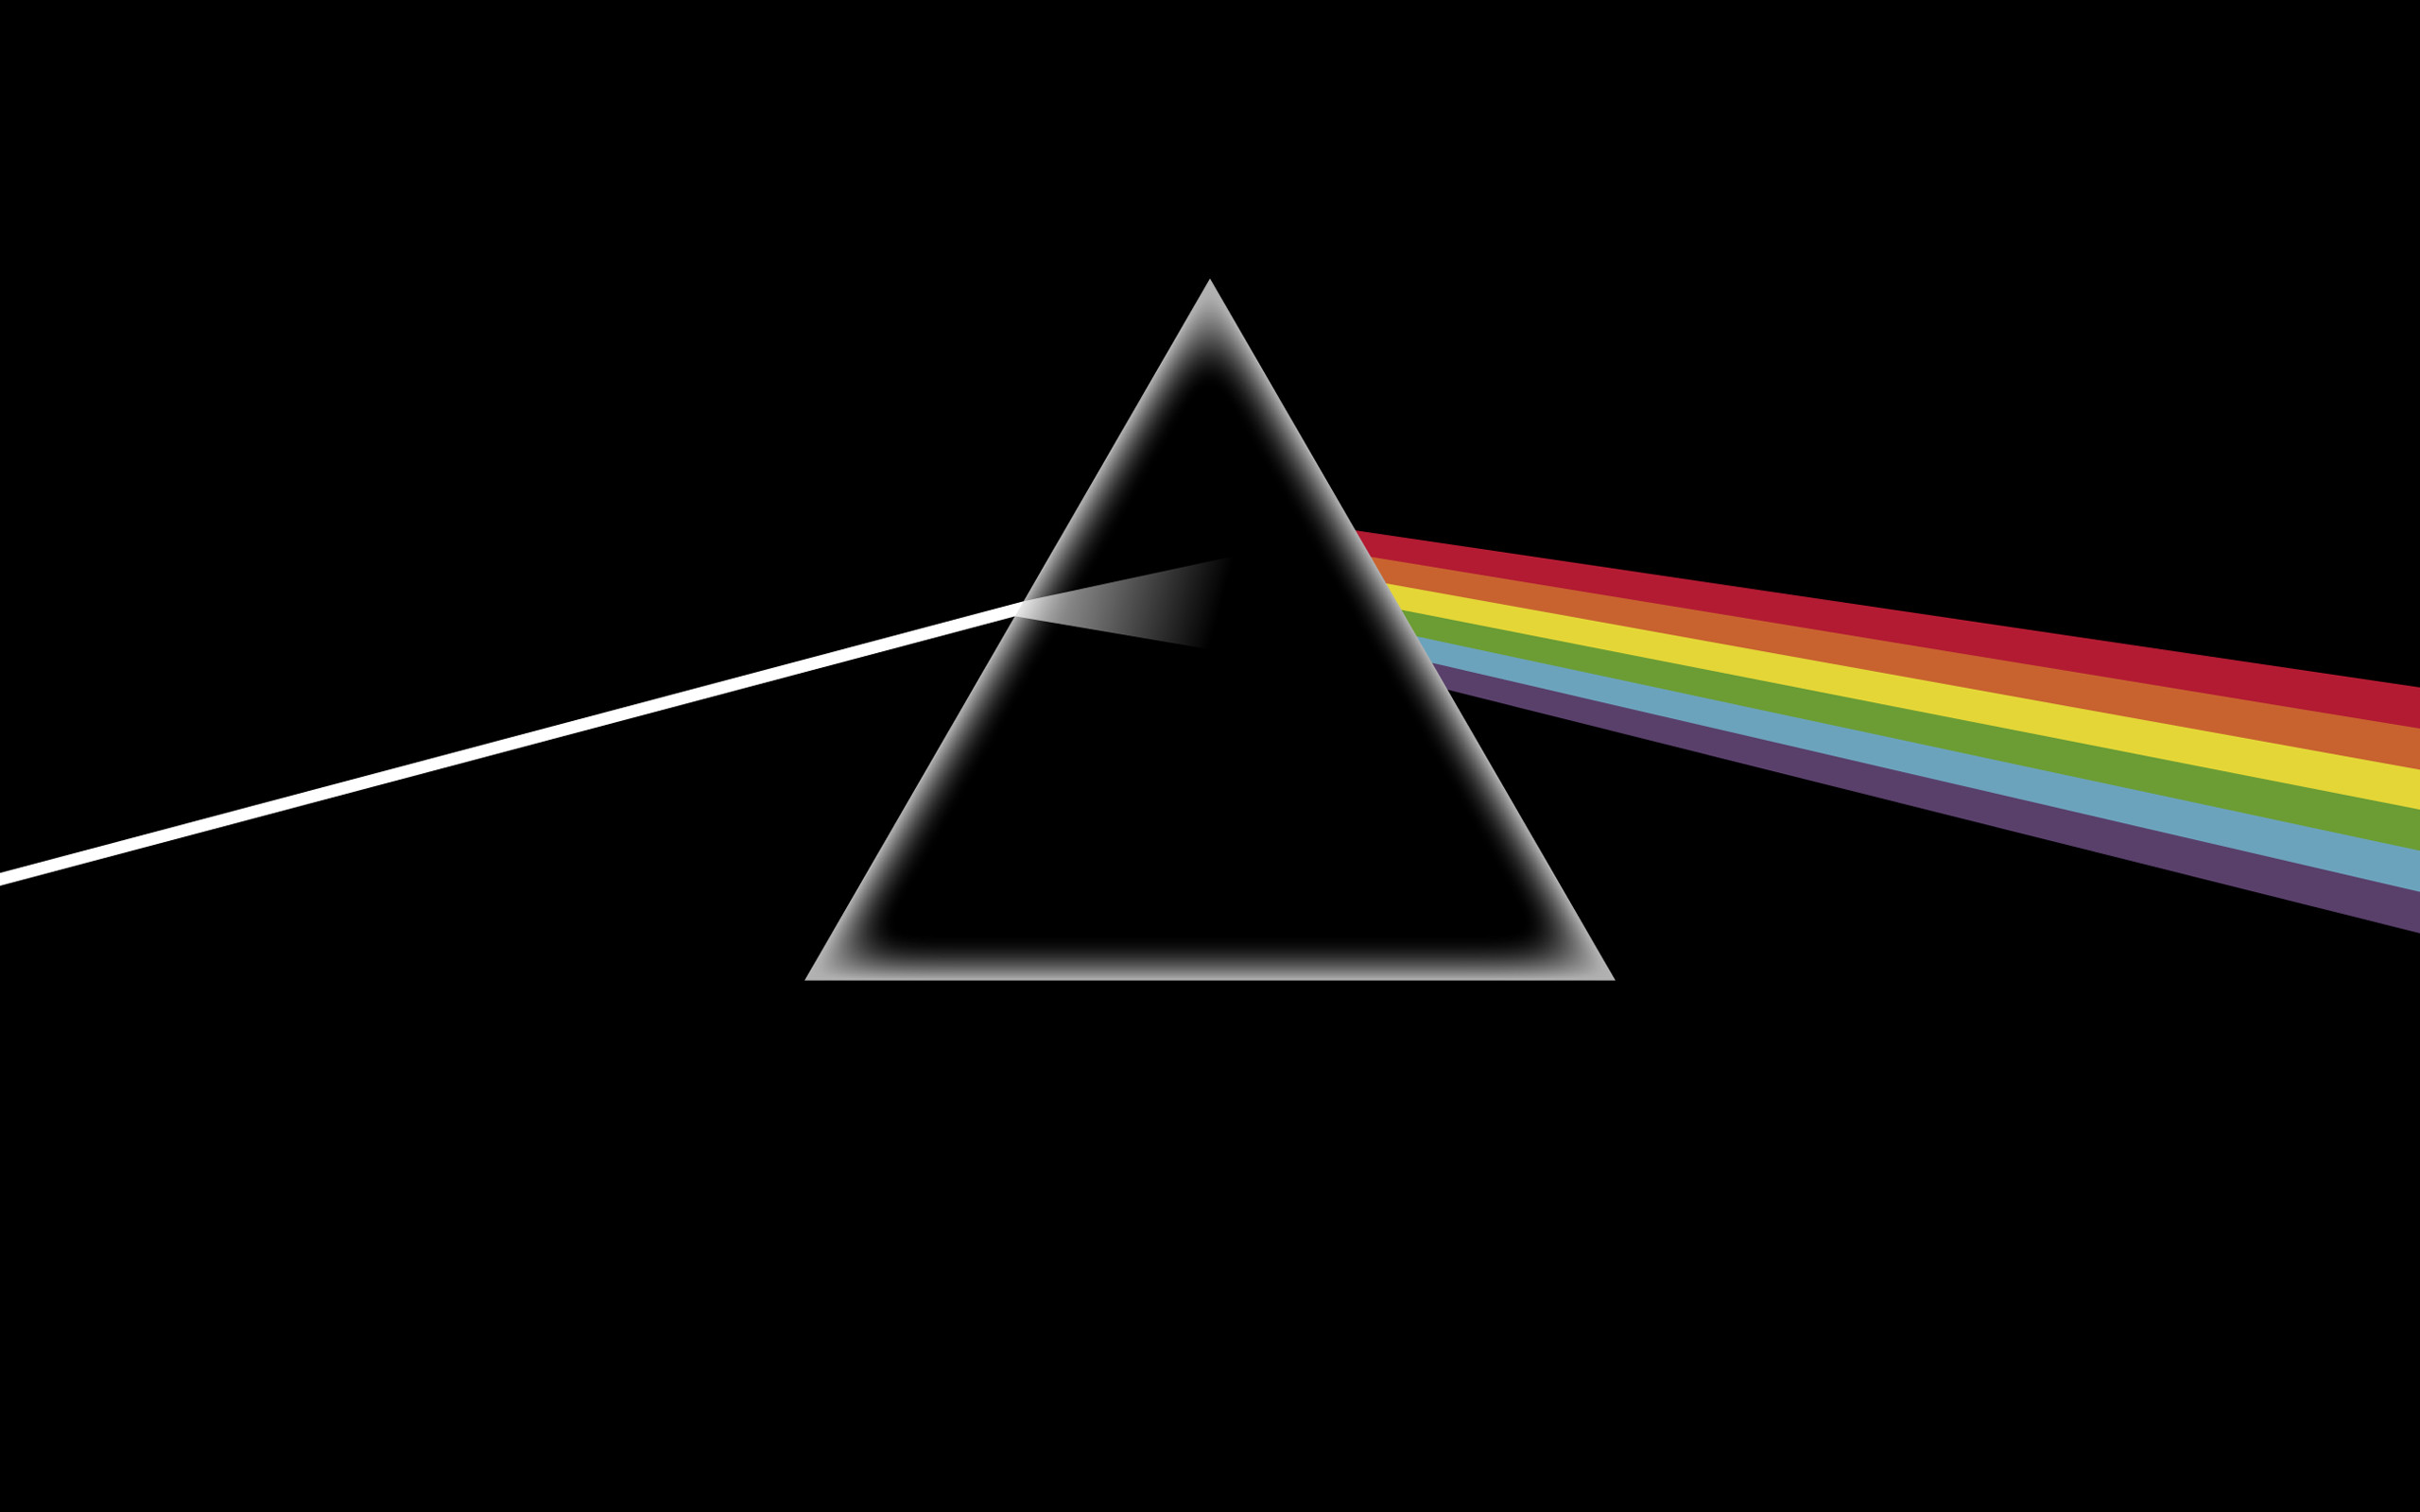 2560x1600 ... Dark Side of the Moon Wallpaper Pack by alphasnail